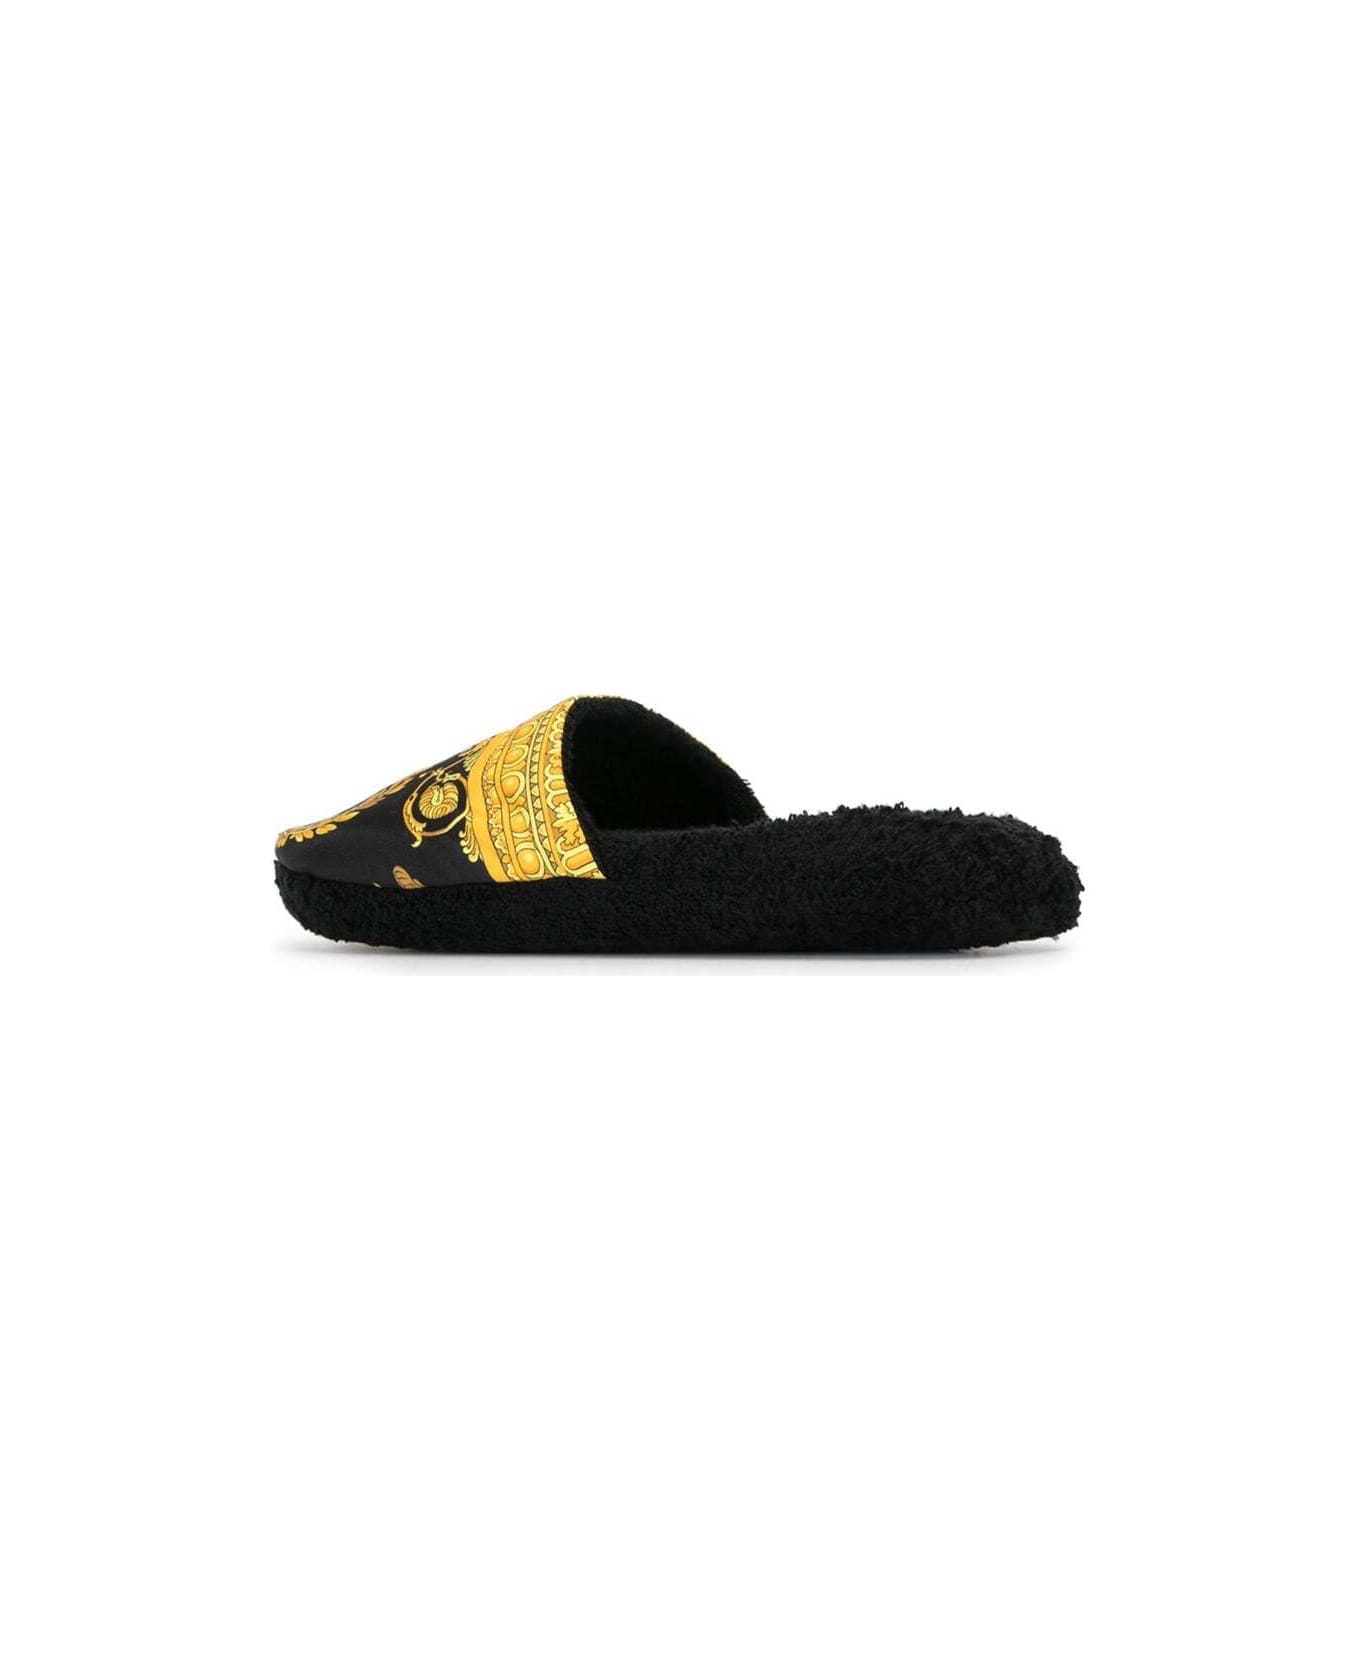 Versace Black And Gold House Slippers In Cotton And Terry With Baroque Print - Nero